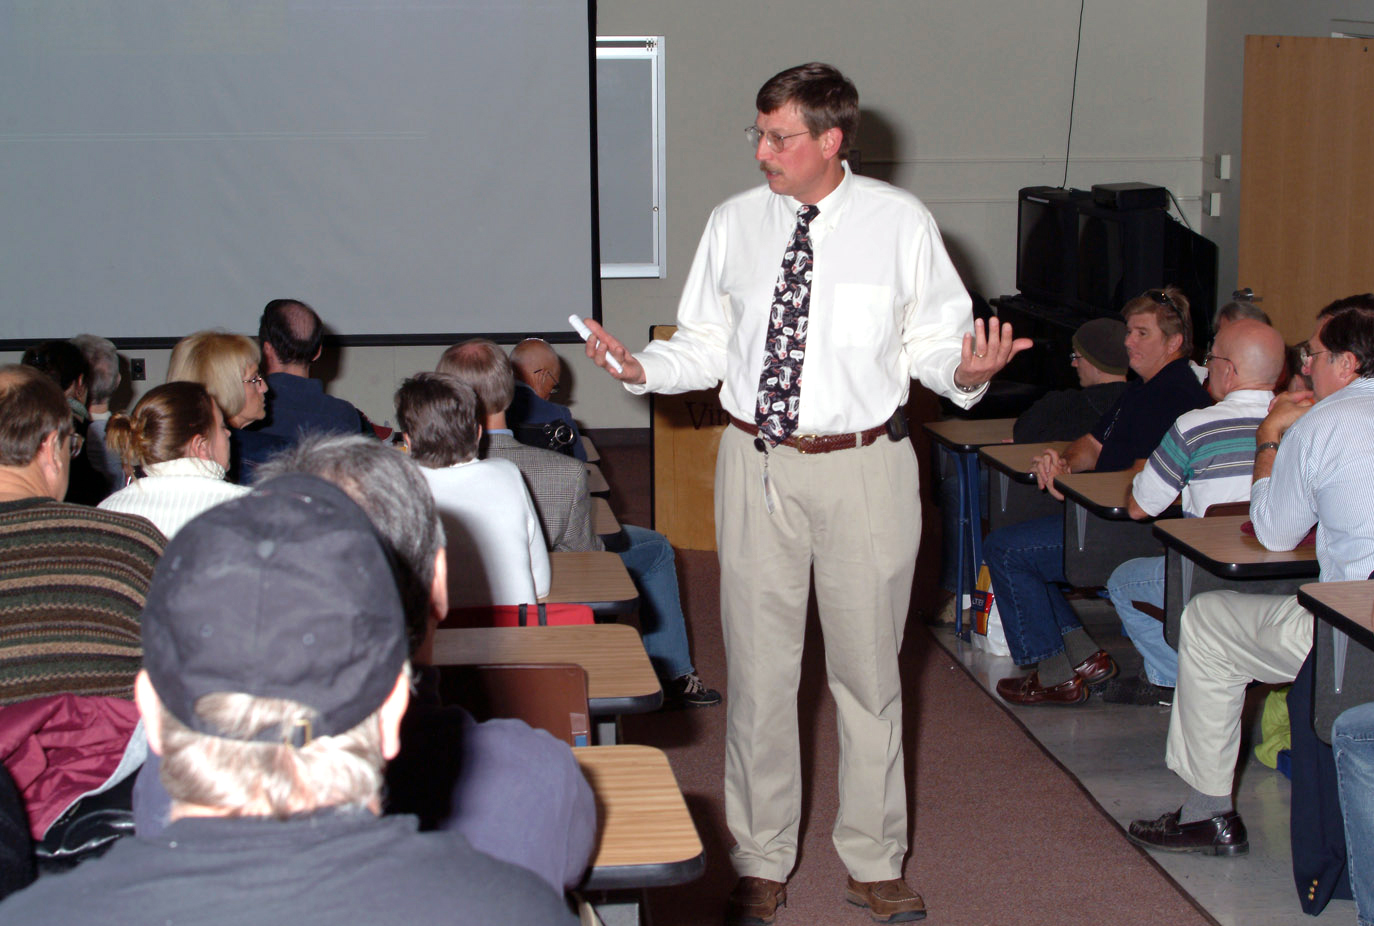 Veterinary College faculty member, Dr. Kevin Pelzer, provides lecture for continuing education program.